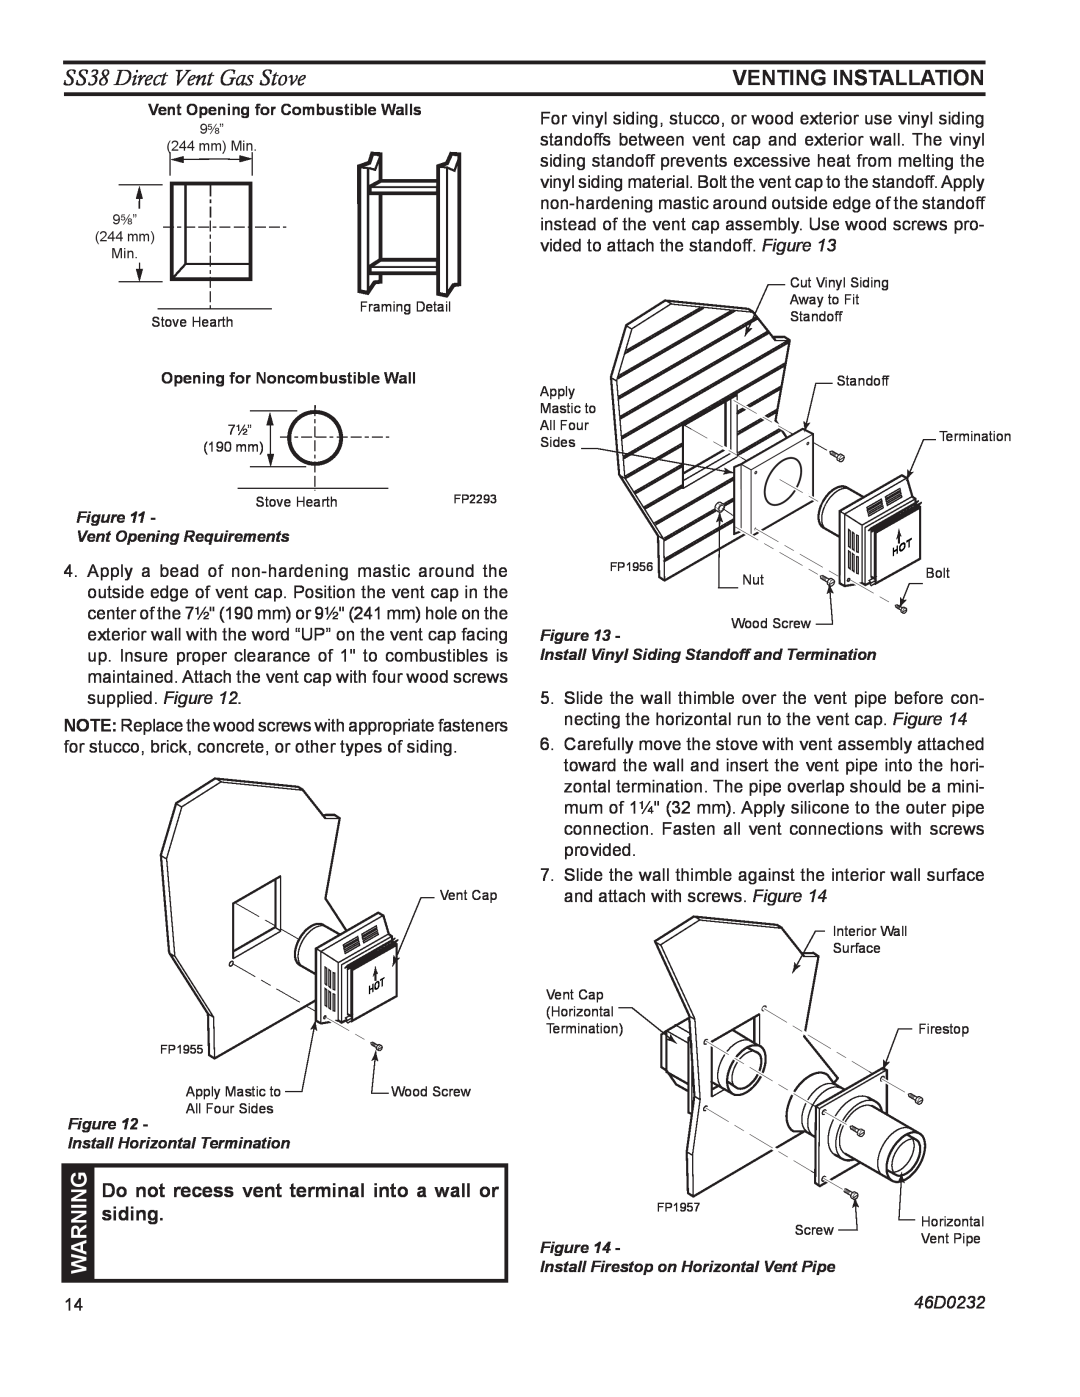 Monessen Hearth operating instructions Venting Installation, SS38 Direct Vent Gas Stove, 46D0232 